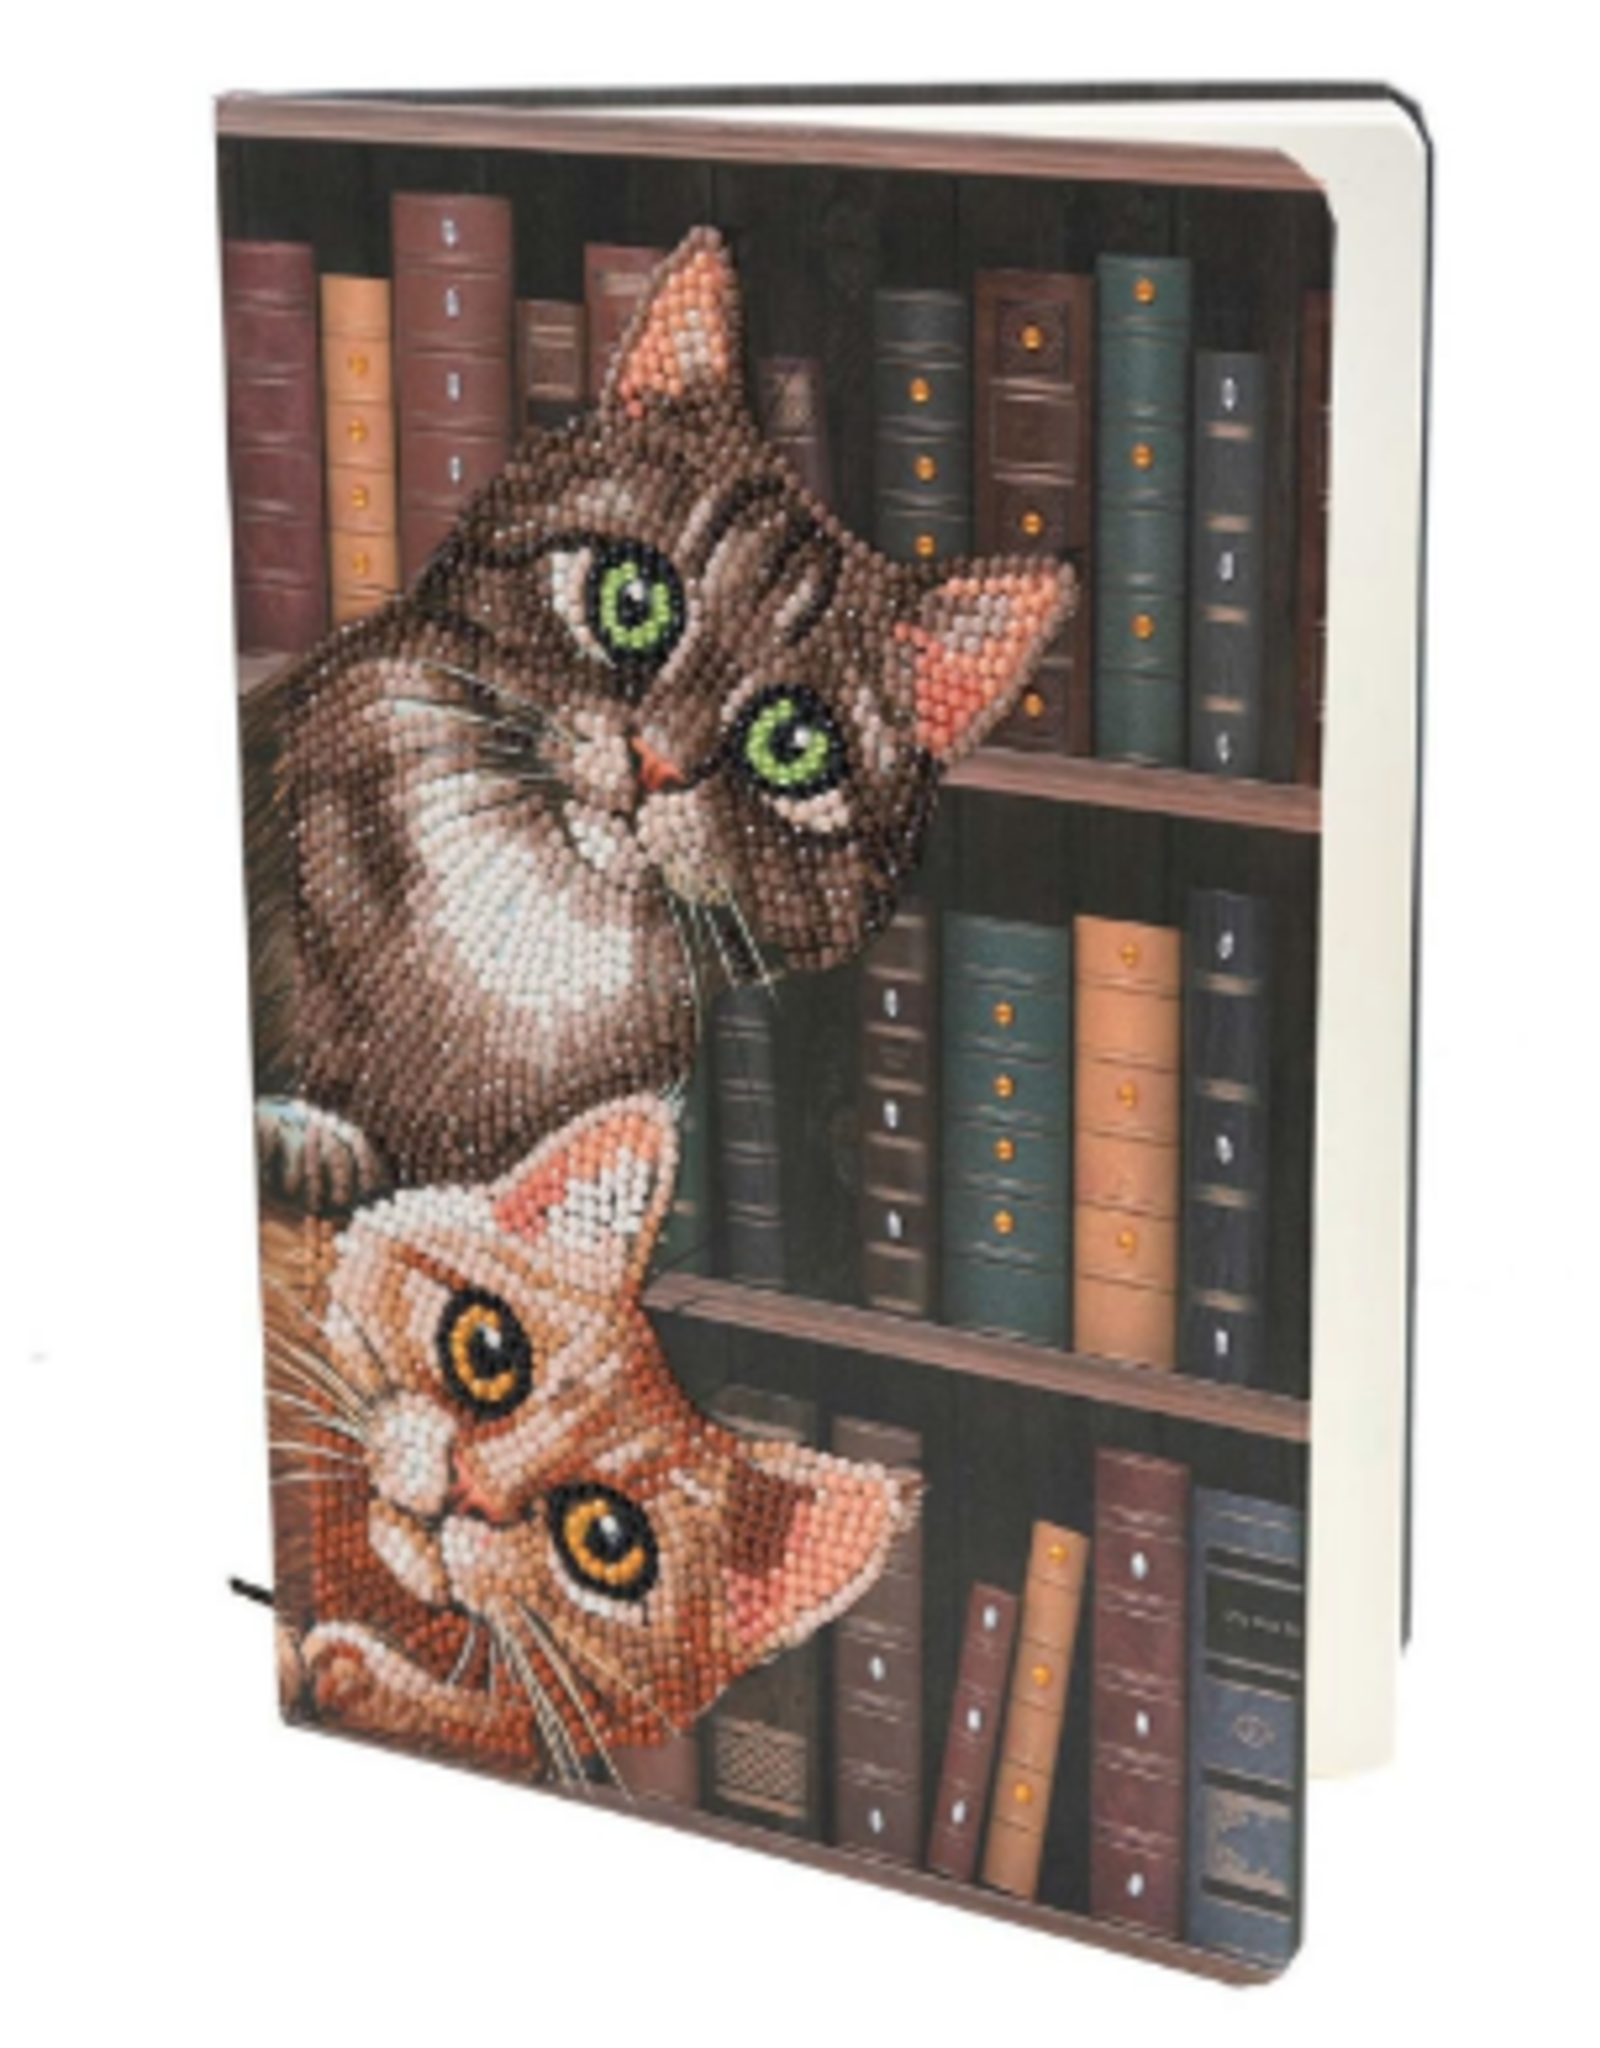 Outset media Crystal Art Notebook - Cats in the Library